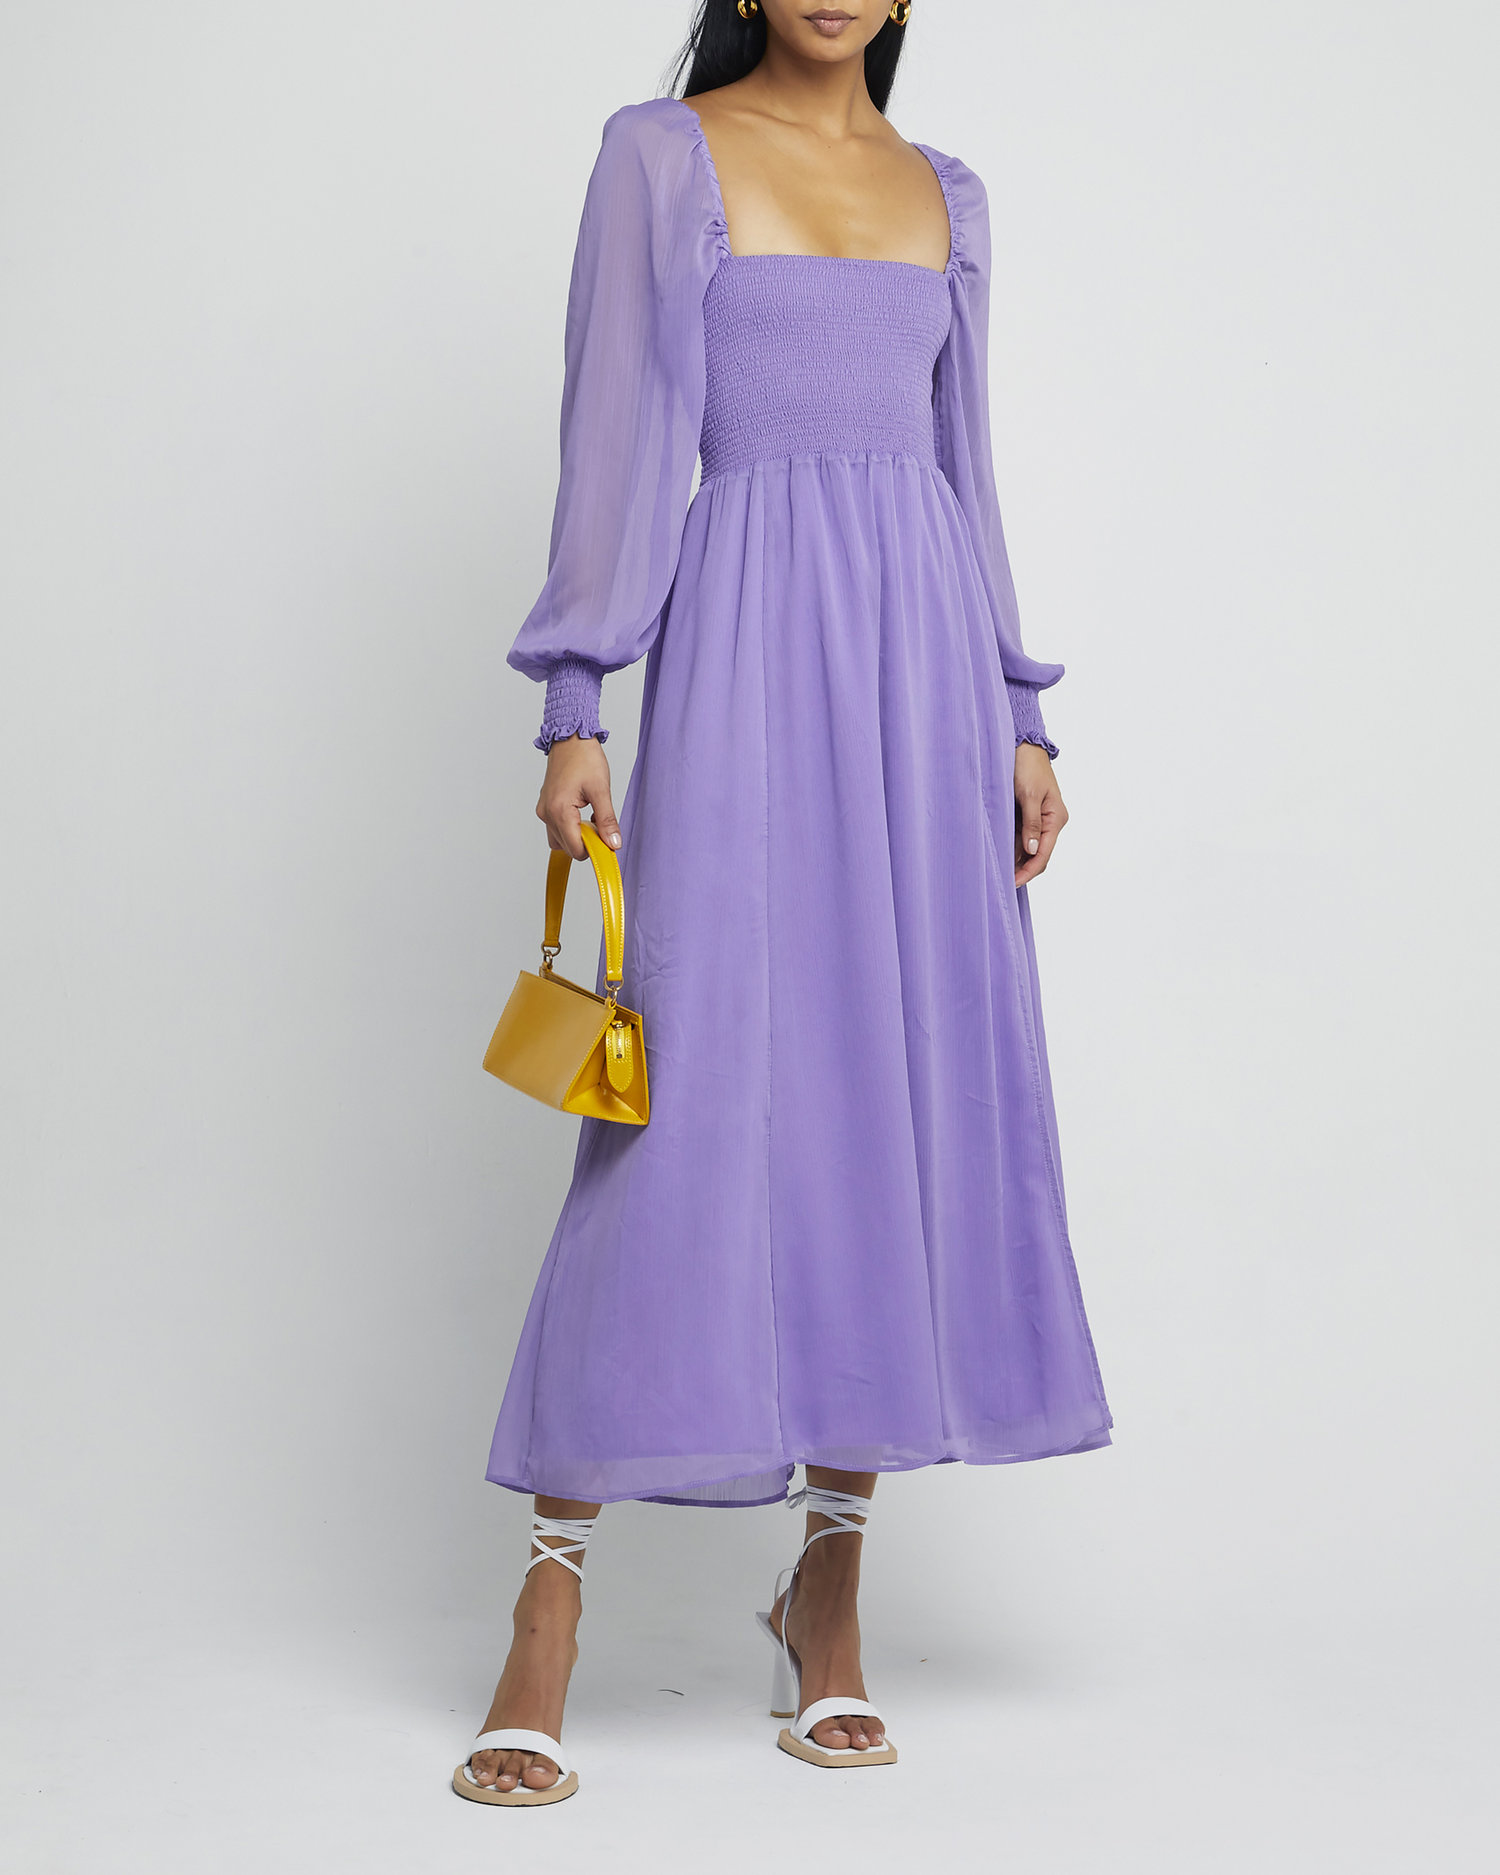 Fourth image of Classic Smocked Maxi Dress, a purple maxi dress, side slit, long, sheer sleeves, puff sleeves, square neckline, smocked bodice